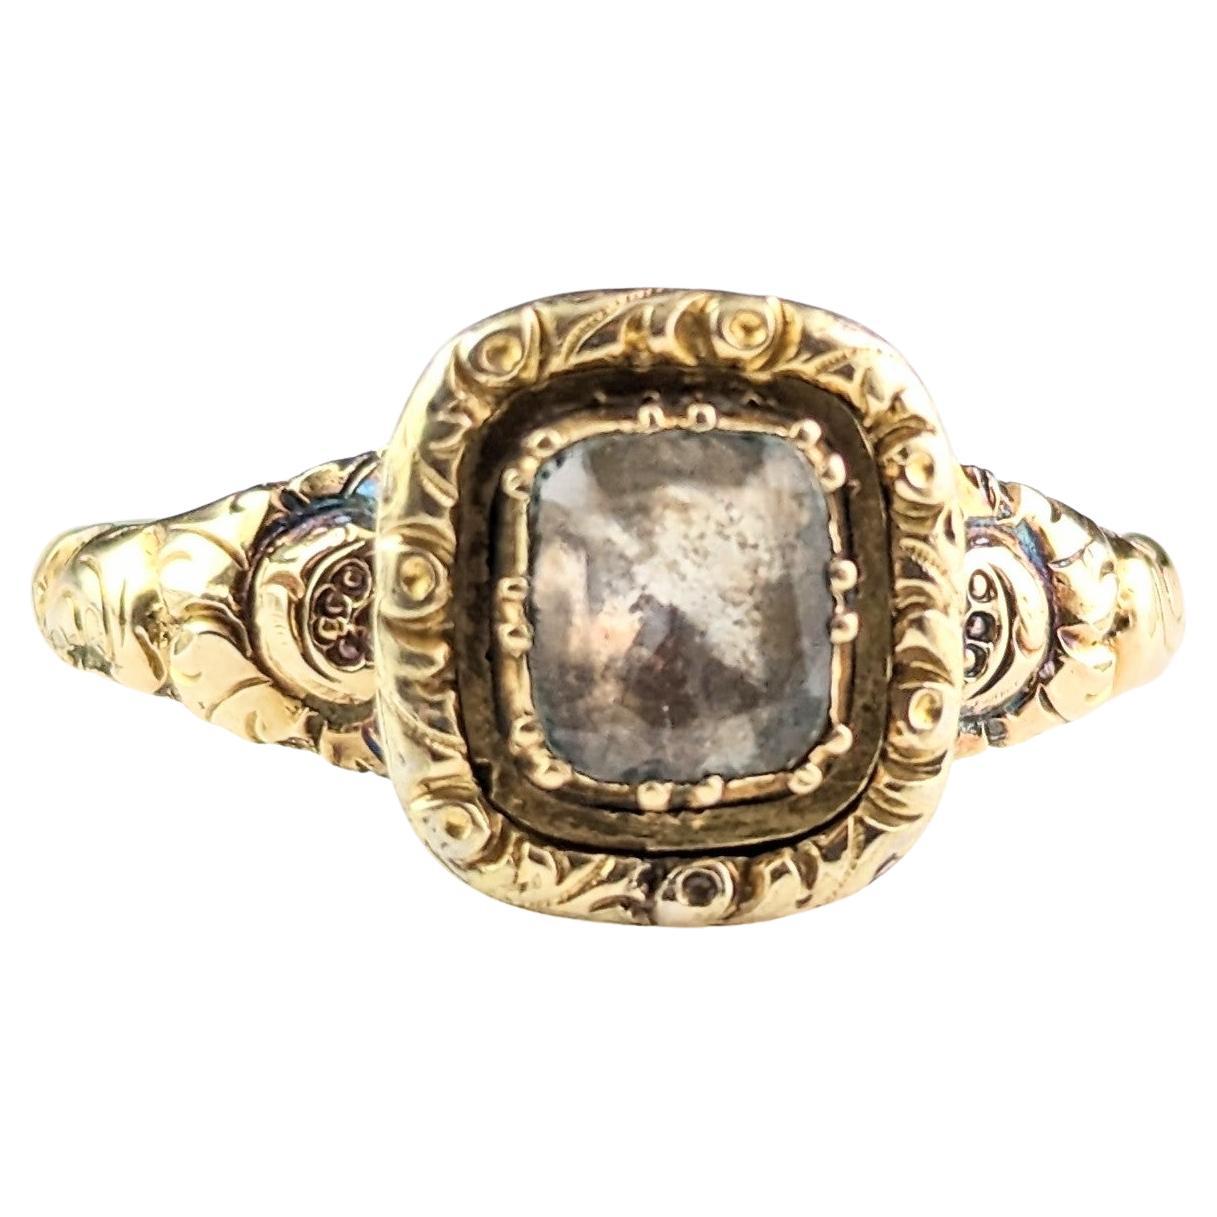 Antique Georgian Foiled Quartz Ring, 12k Gold, Chase and Engraved